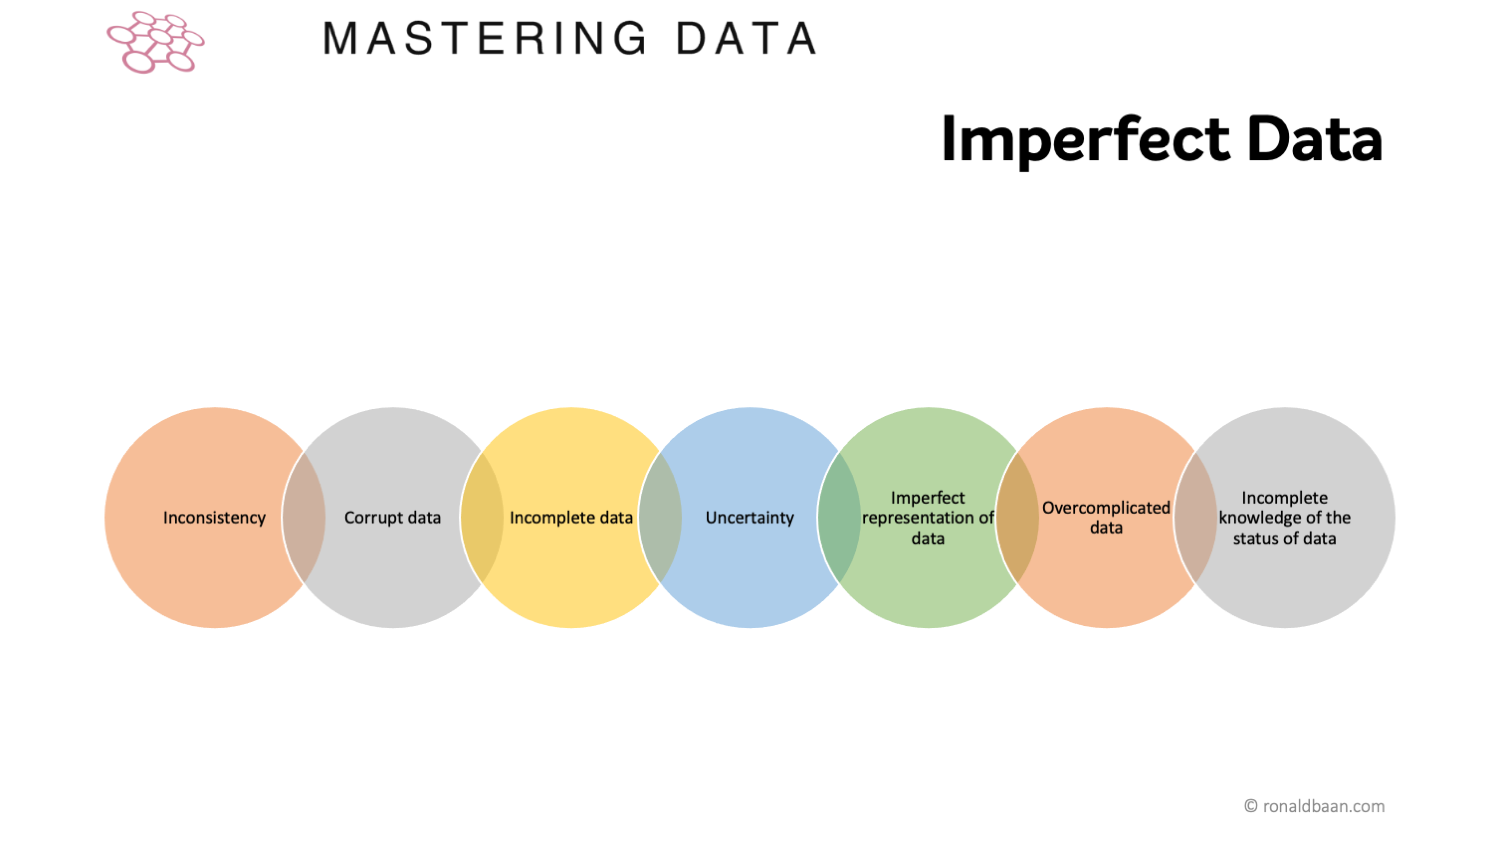 Imperfect Data! Now what?